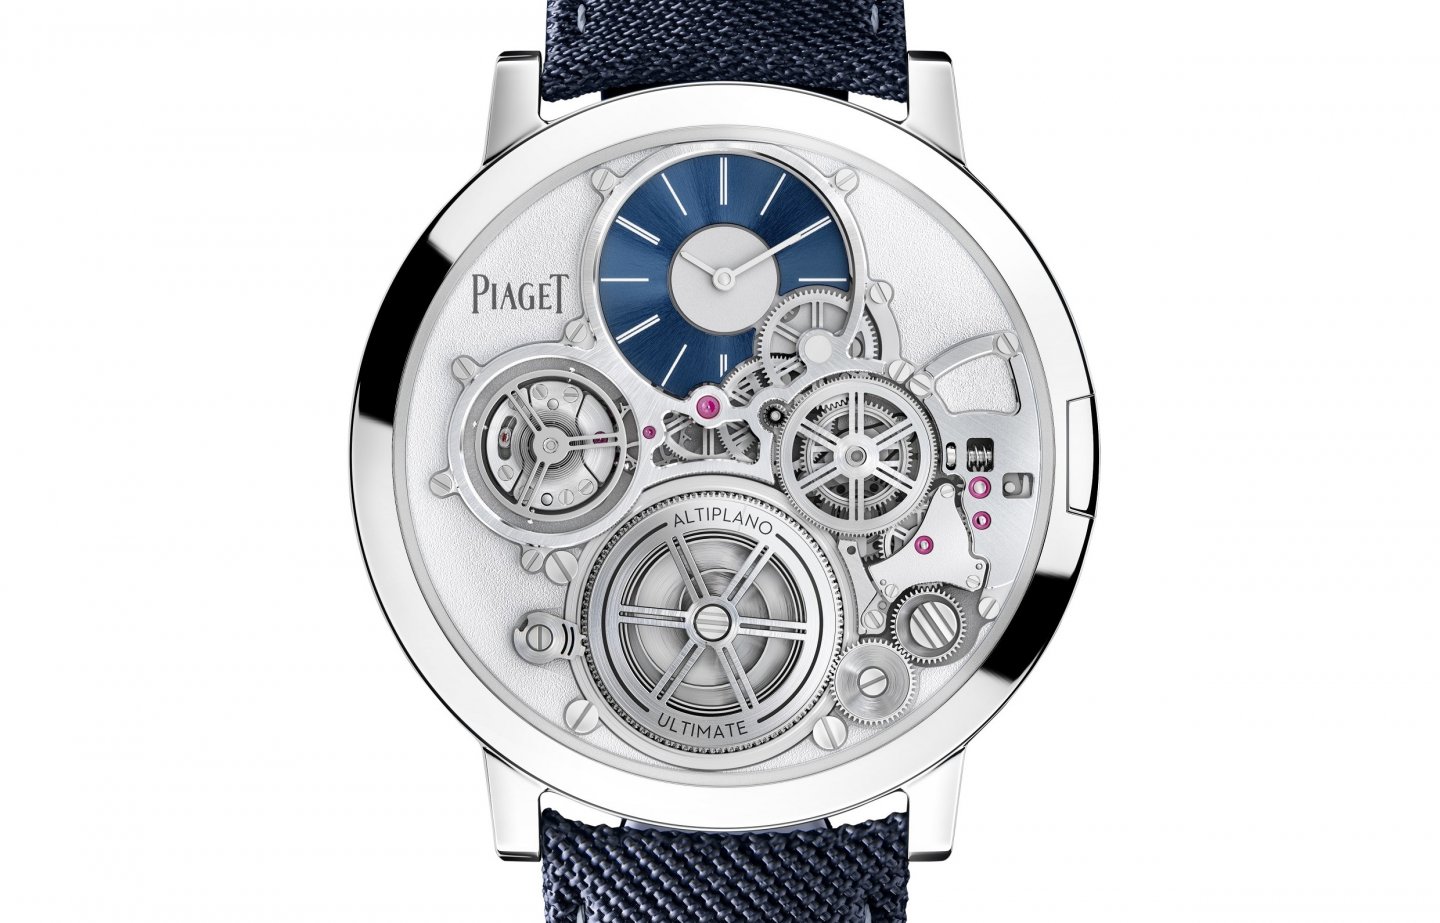 GPHG 2020 結果速報 金の針賞(Aiguille d'Or)はPiaget Altiplano Ultimate Concept